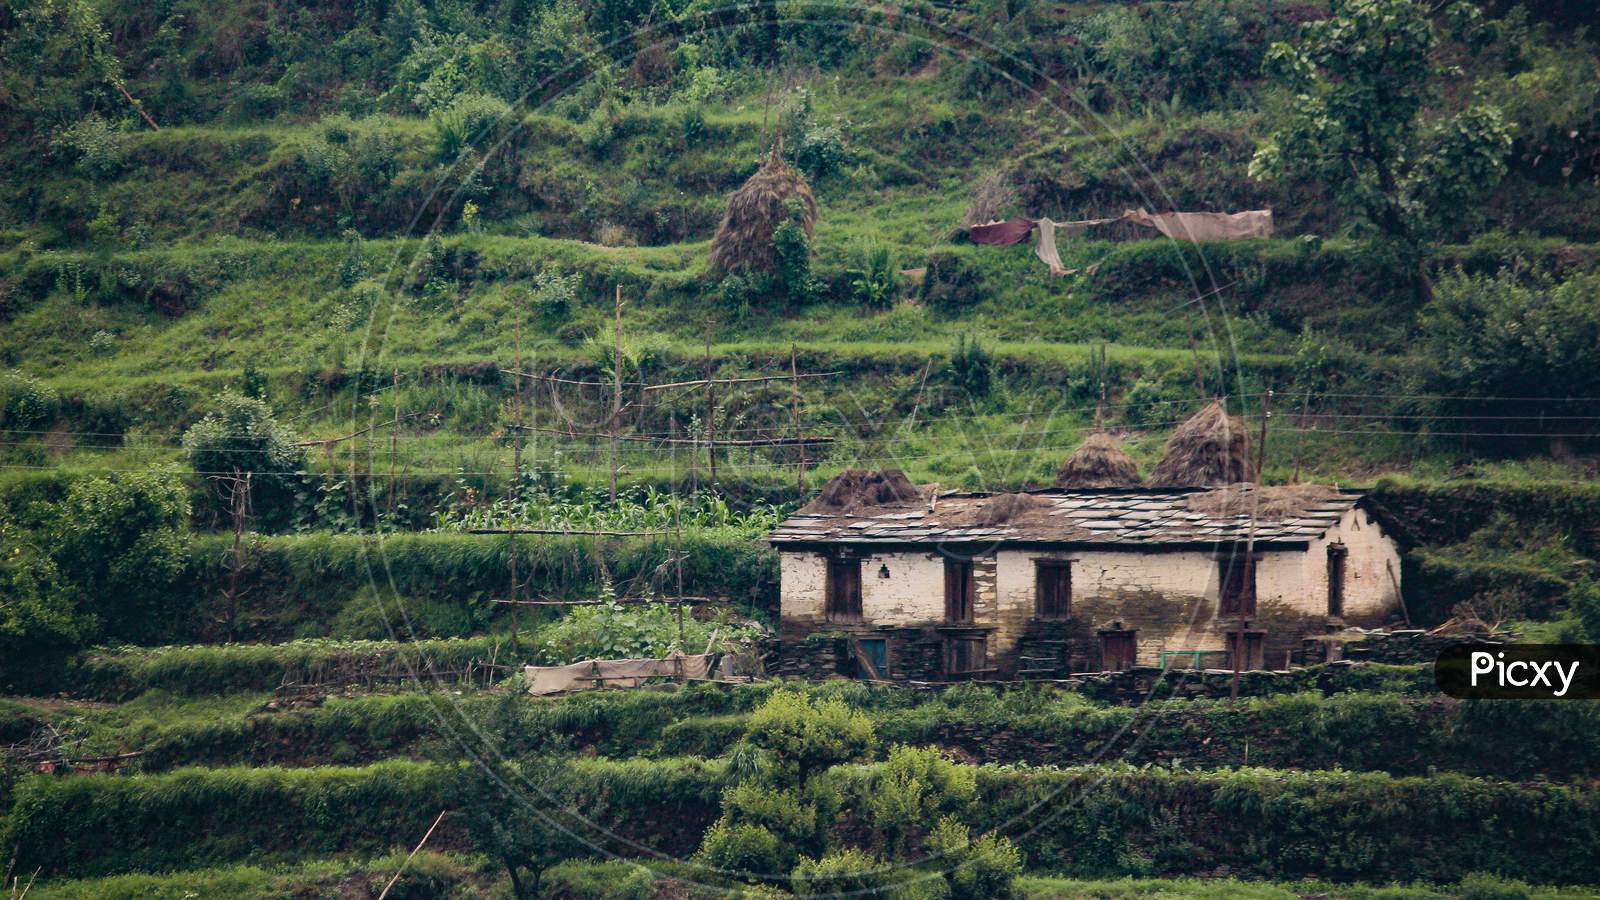 A Landscape Of A Hut House In The Mountains, Old And Traditional Way Of Building Houses.